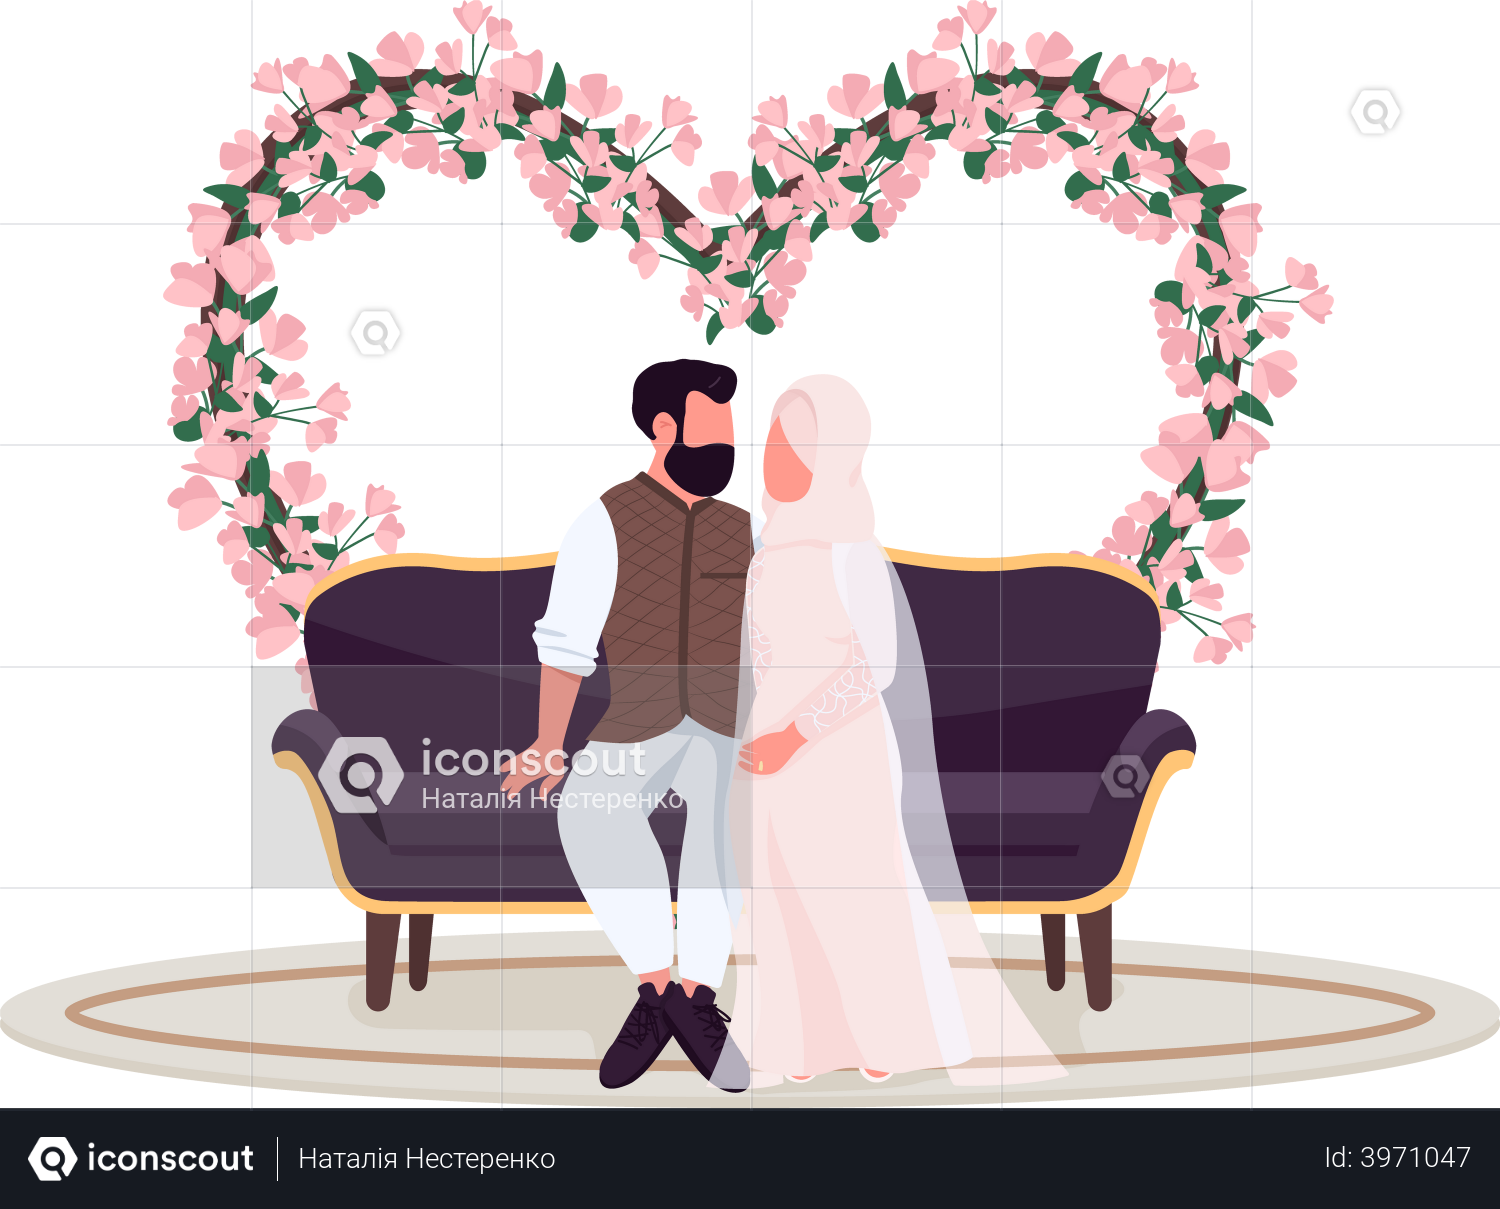 Free: Photo Of Couple Sitting On Stairs - nohat.cc